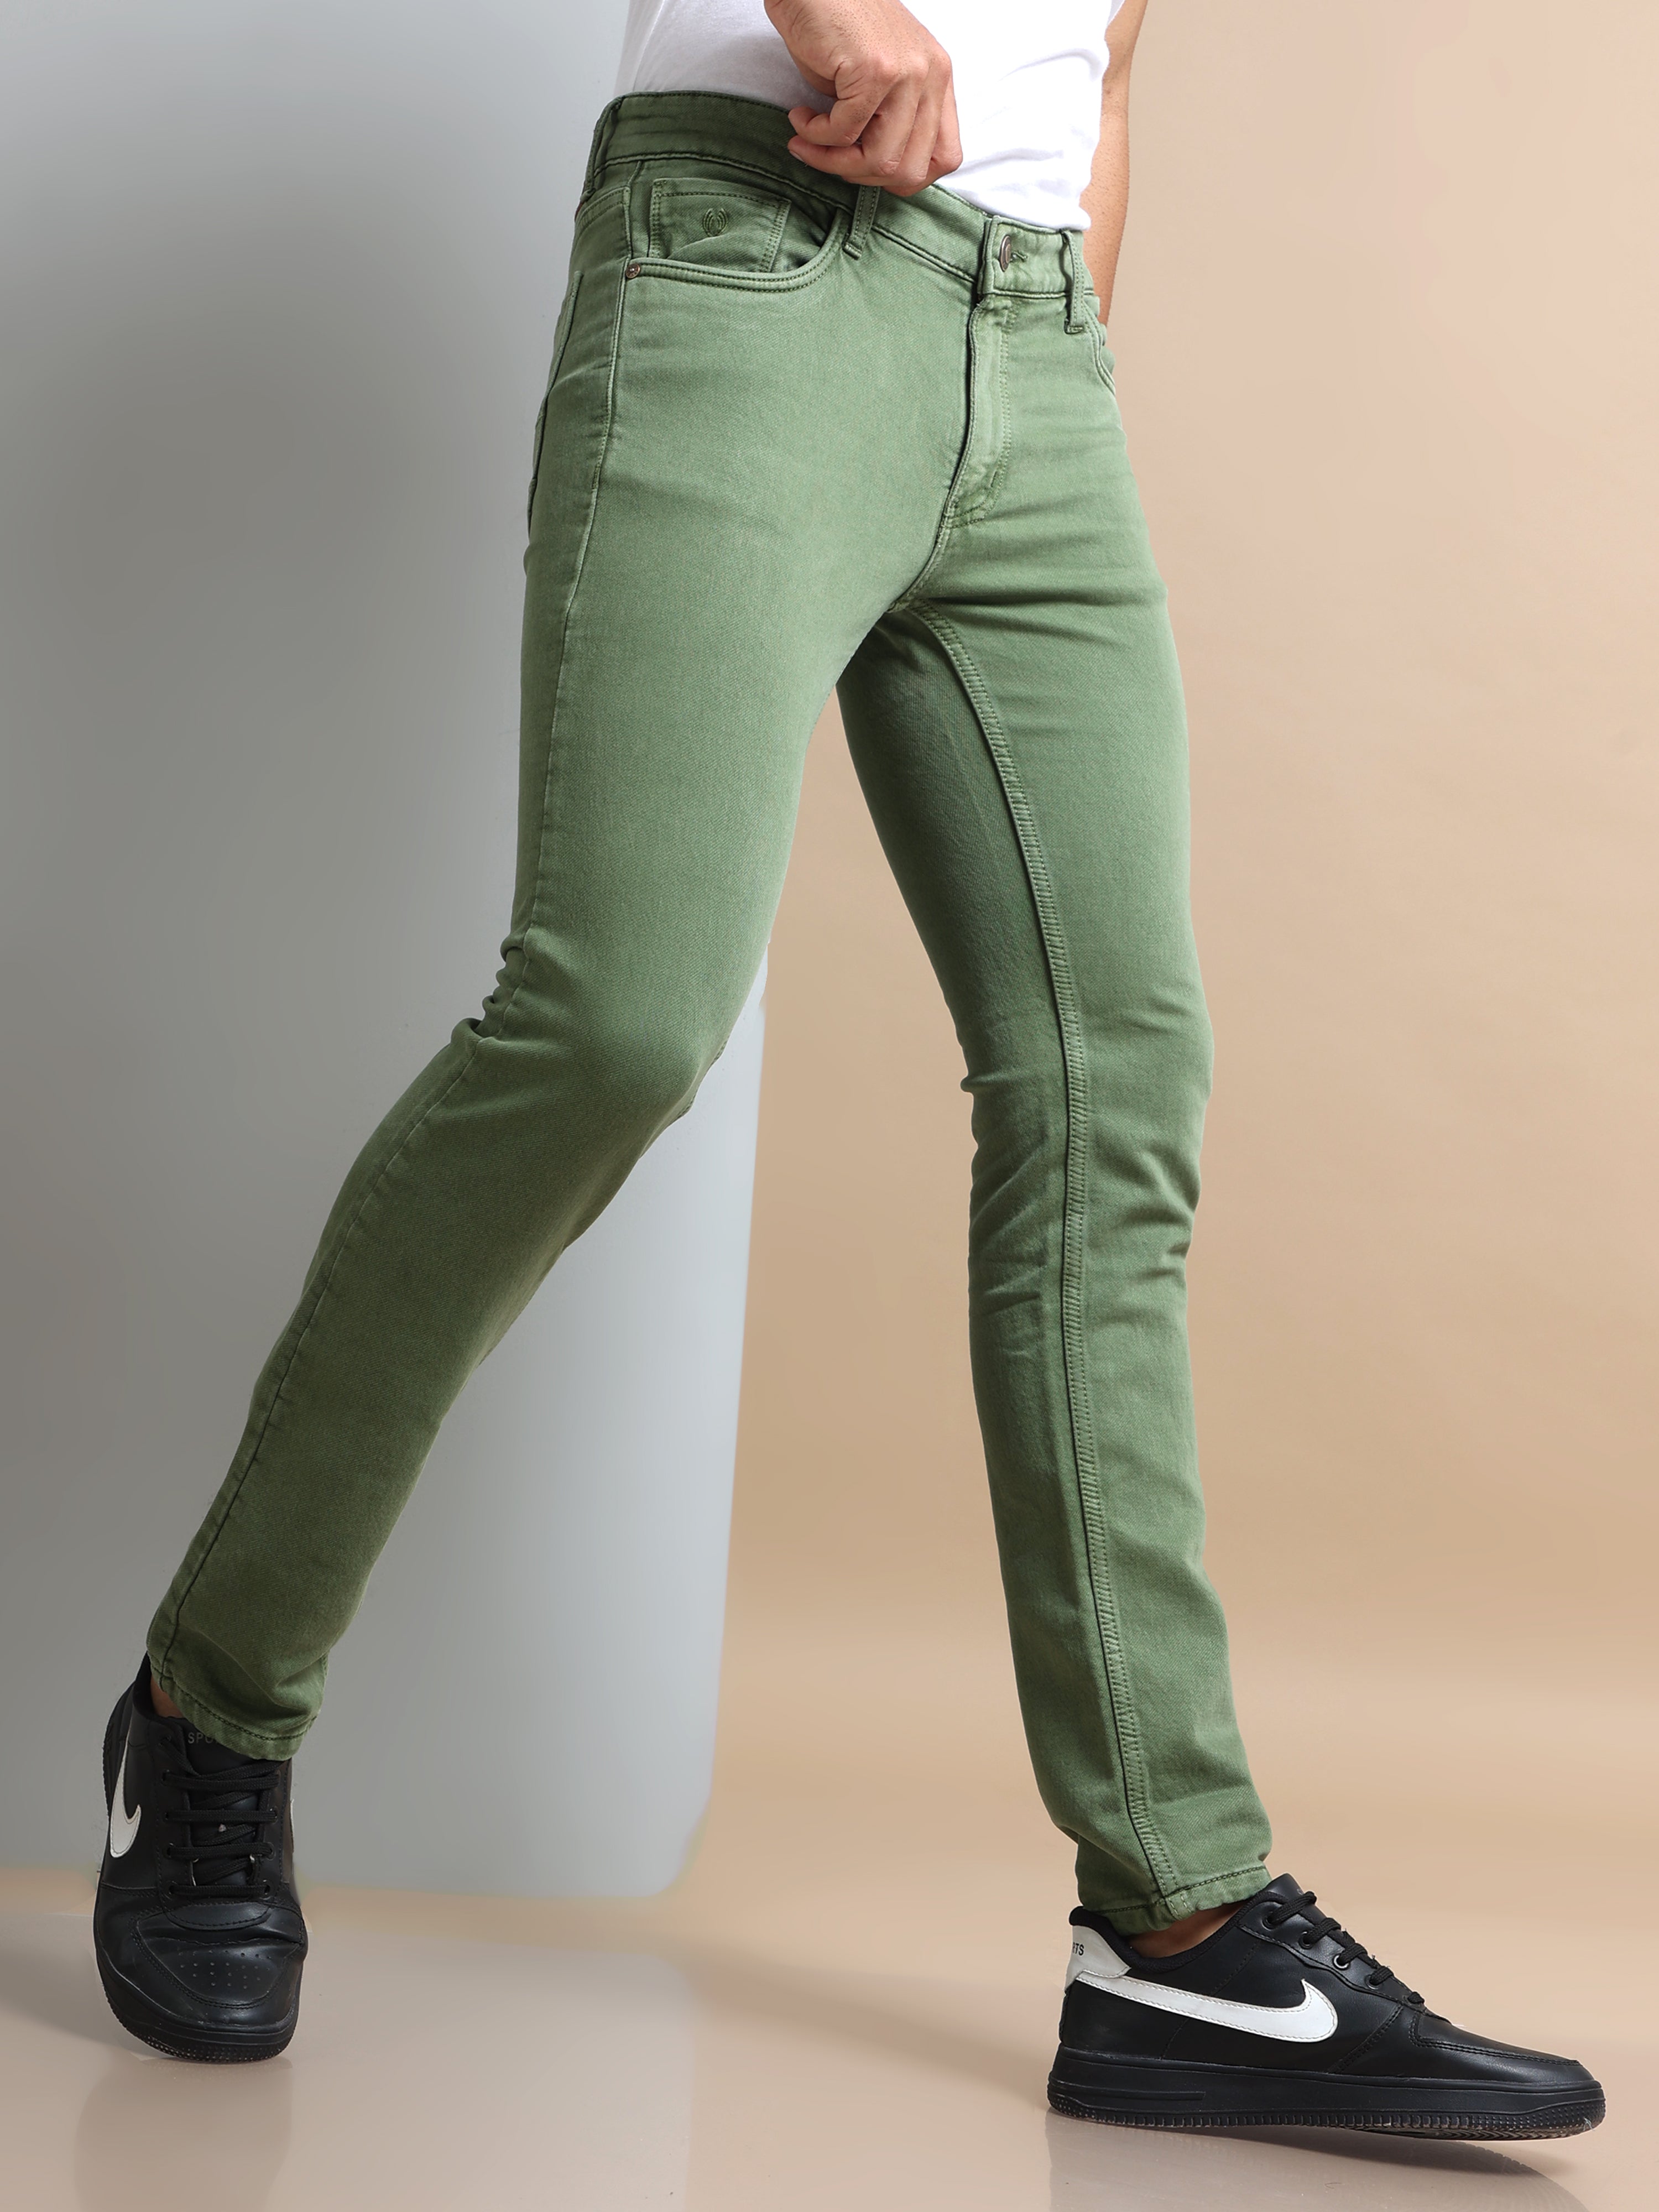 Buy The Roadster Lifestyle Co Women Olive Green Solid Denim Jacket -  Jackets for Women 10562422 | Myntra